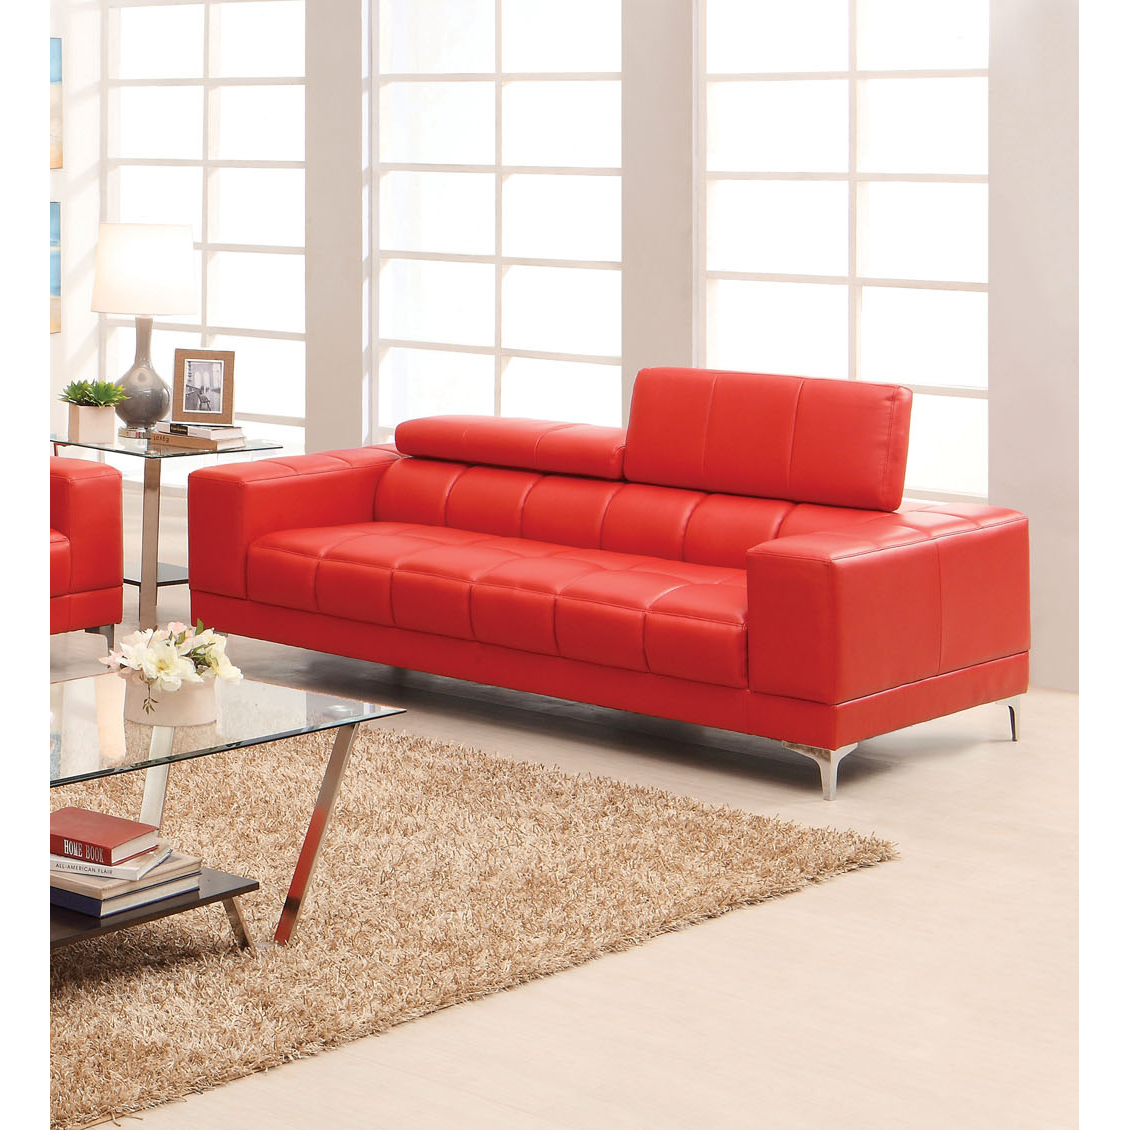 Furniture of America Sions Contemporary Style Tufted Leatherette Sofa